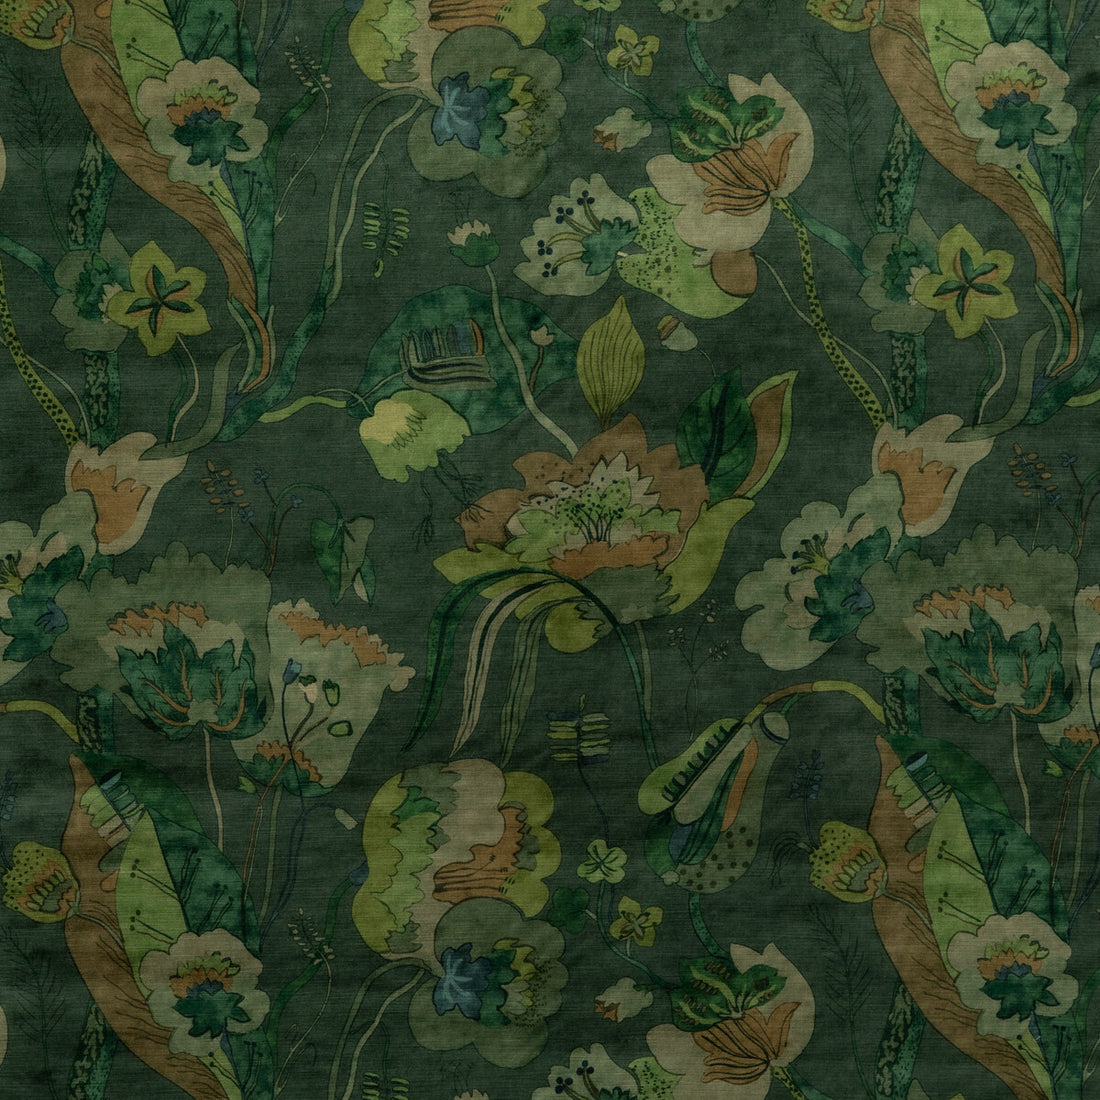 California Velvet fabric in emerald color - pattern BP10813.2.0 - by G P &amp; J Baker in the Signature Velvets collection